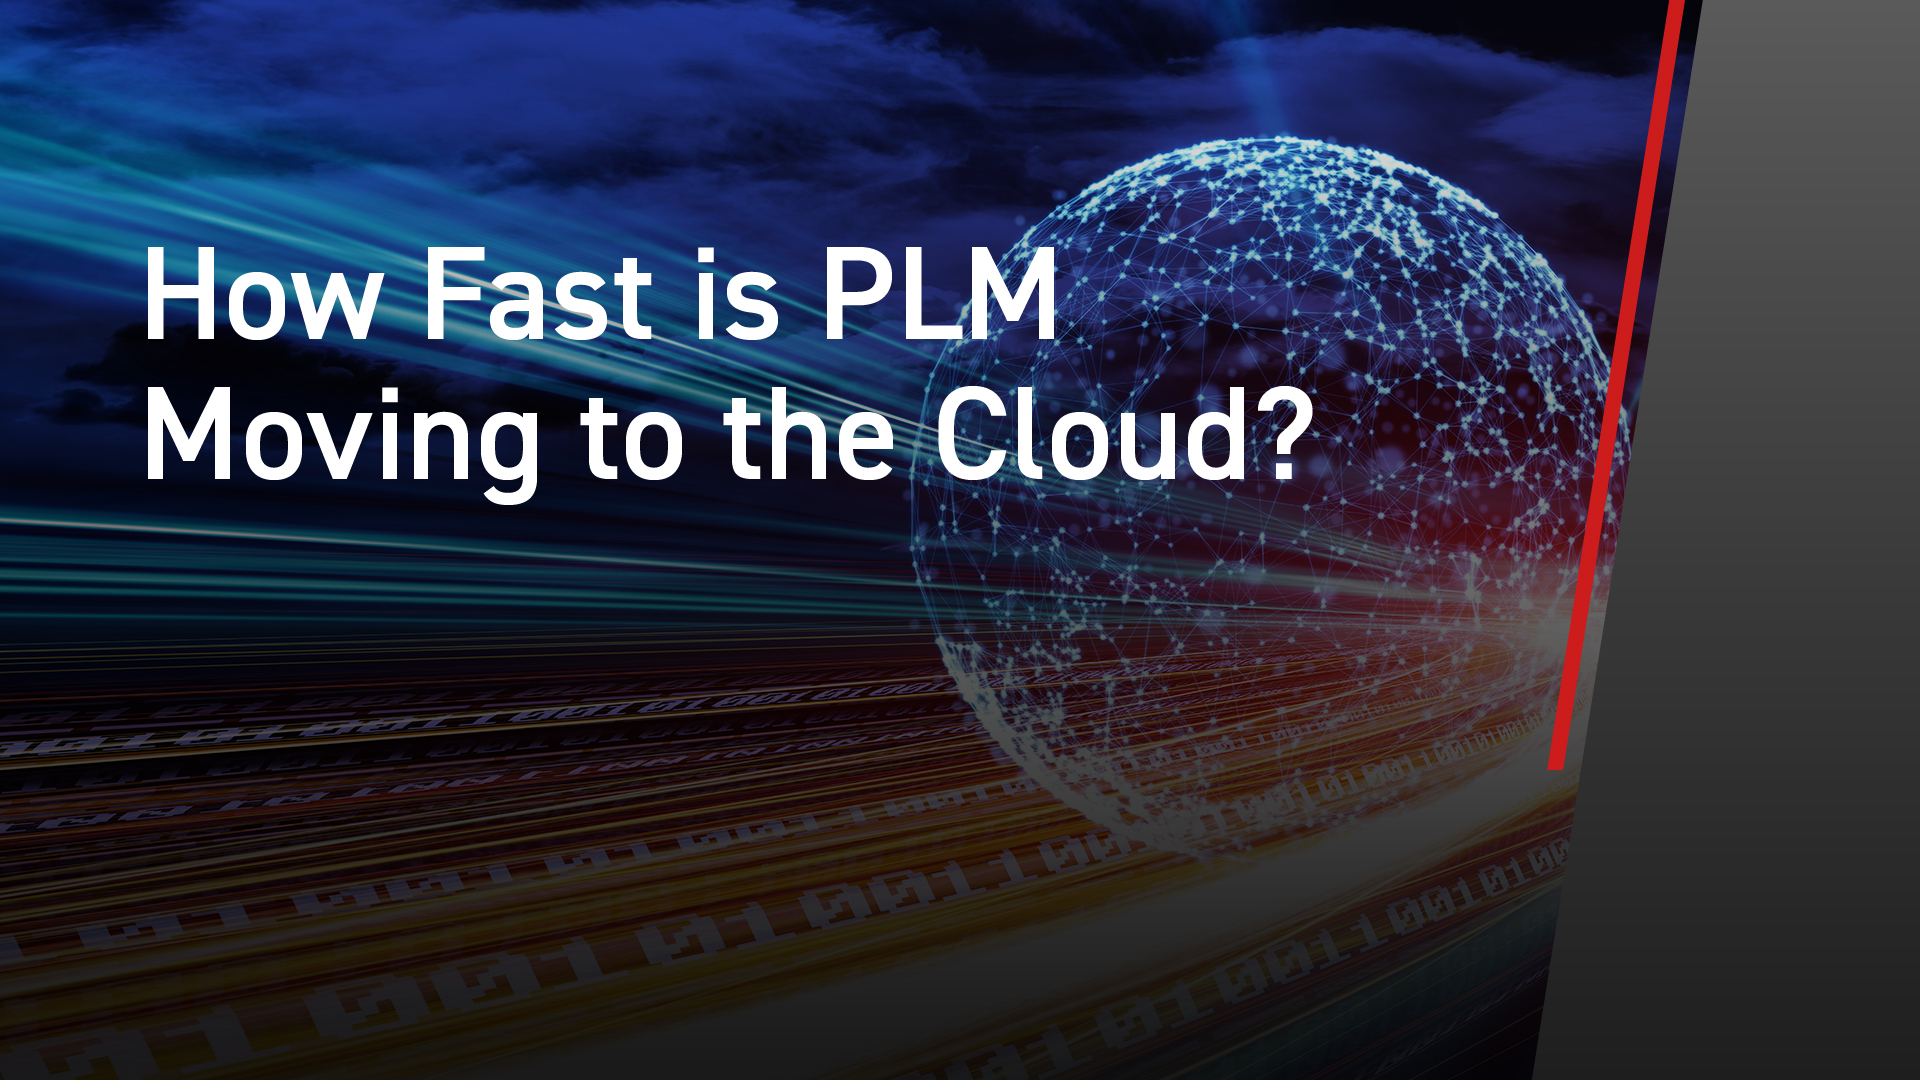 How Fast is PLM Moving to the Cloud?